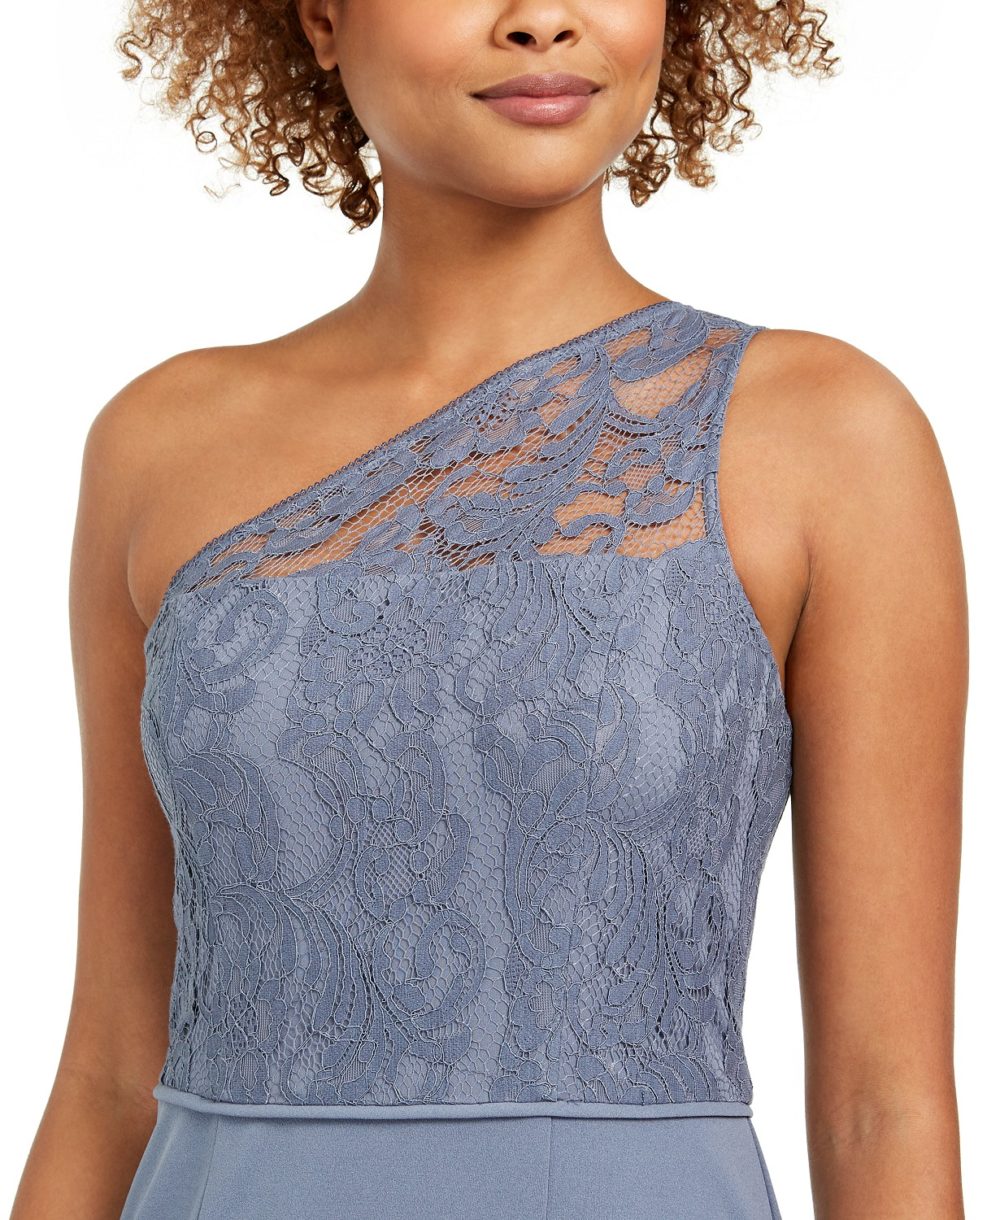 woocommerce-673321-2209615.cloudwaysapps.com-adrianna-papell-womens-dusty-blue-one-shoulder-lace-gown-dress